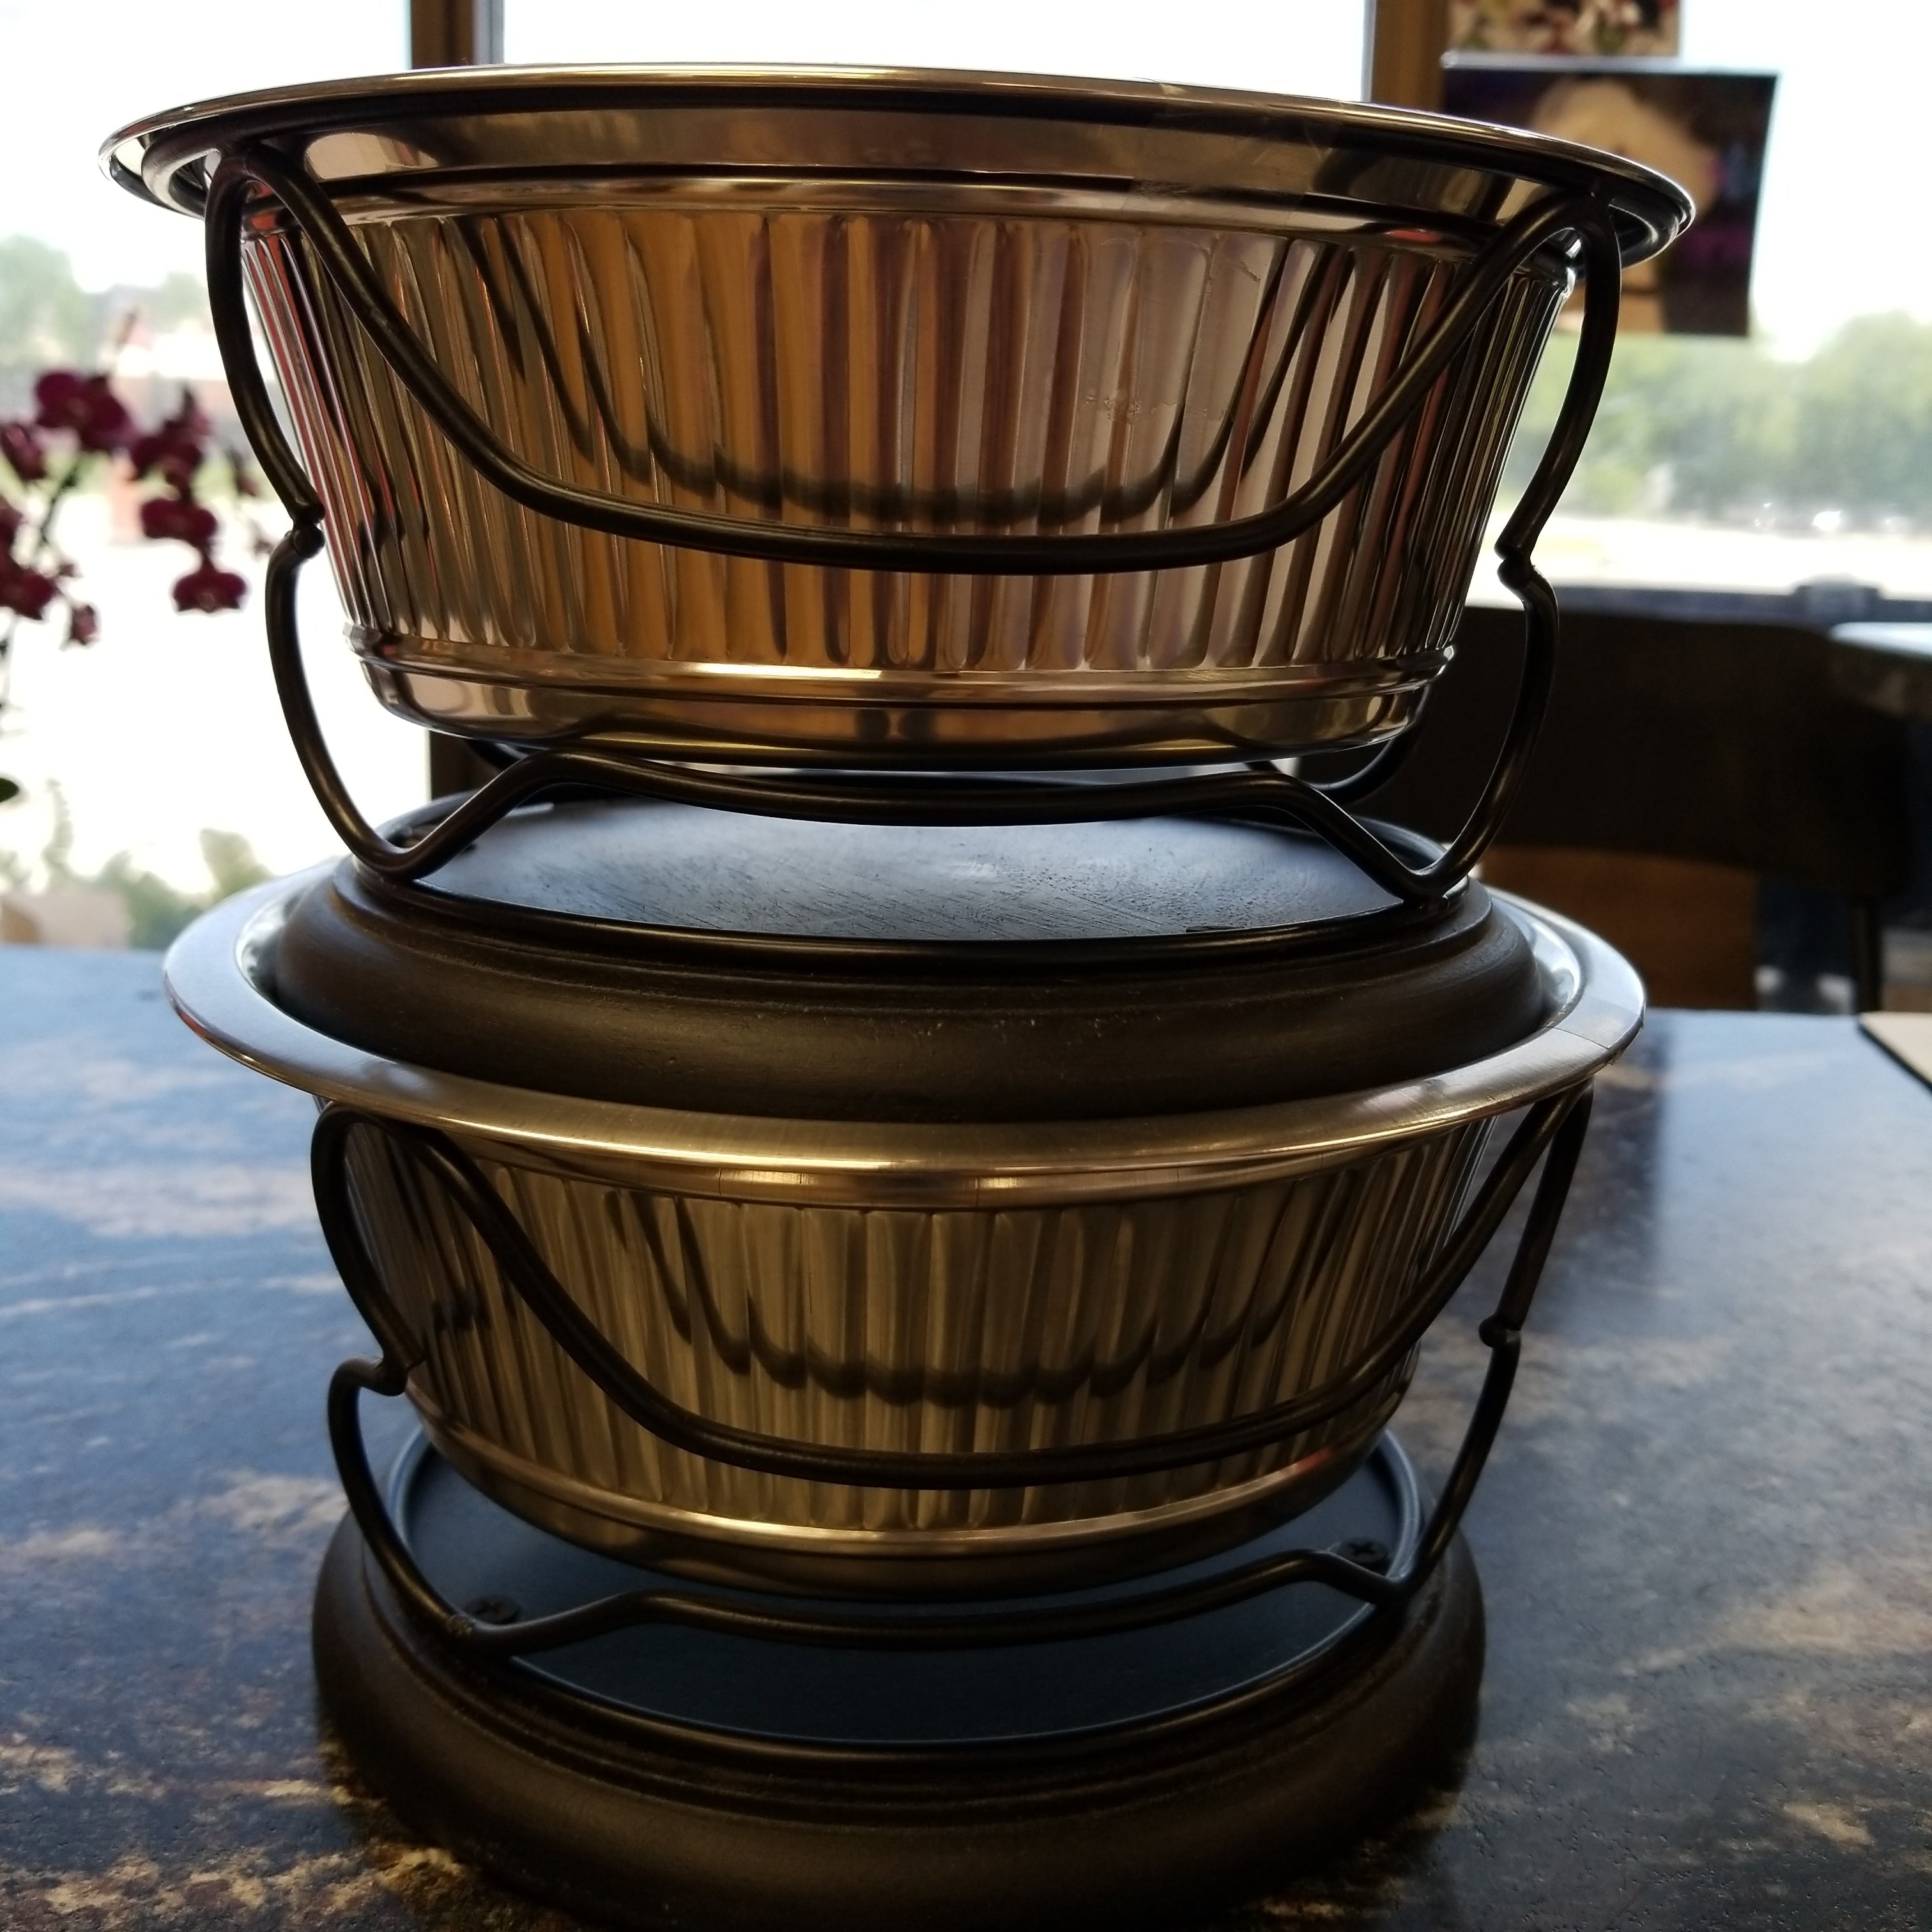 Petrageous Samoa Fluted Steel Bowls in Wooden Stands, 2 Quart Capacity, Black (Set of 2)